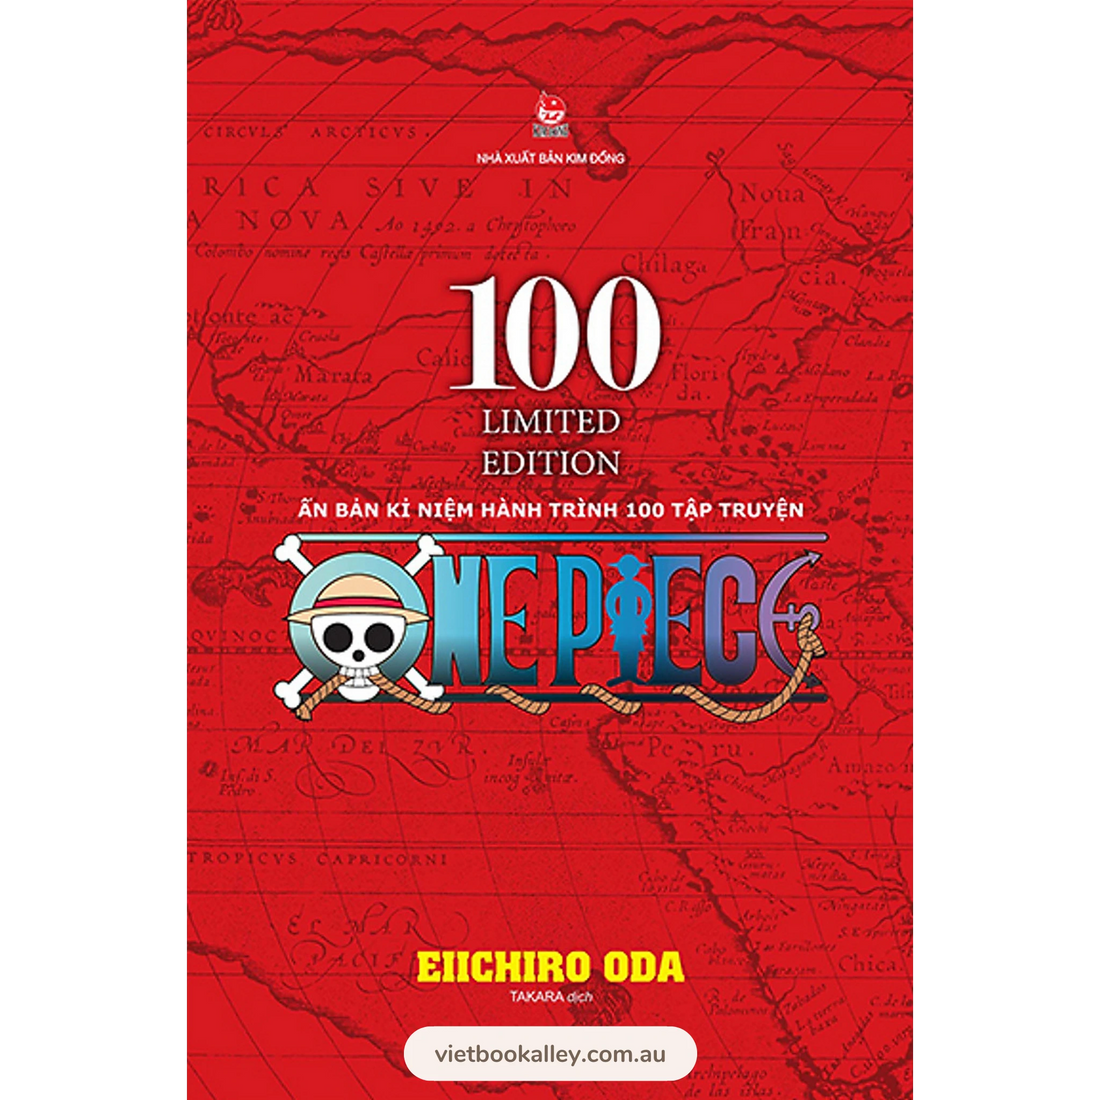 One Piece - Tập 100 (LIMITED EDITION)